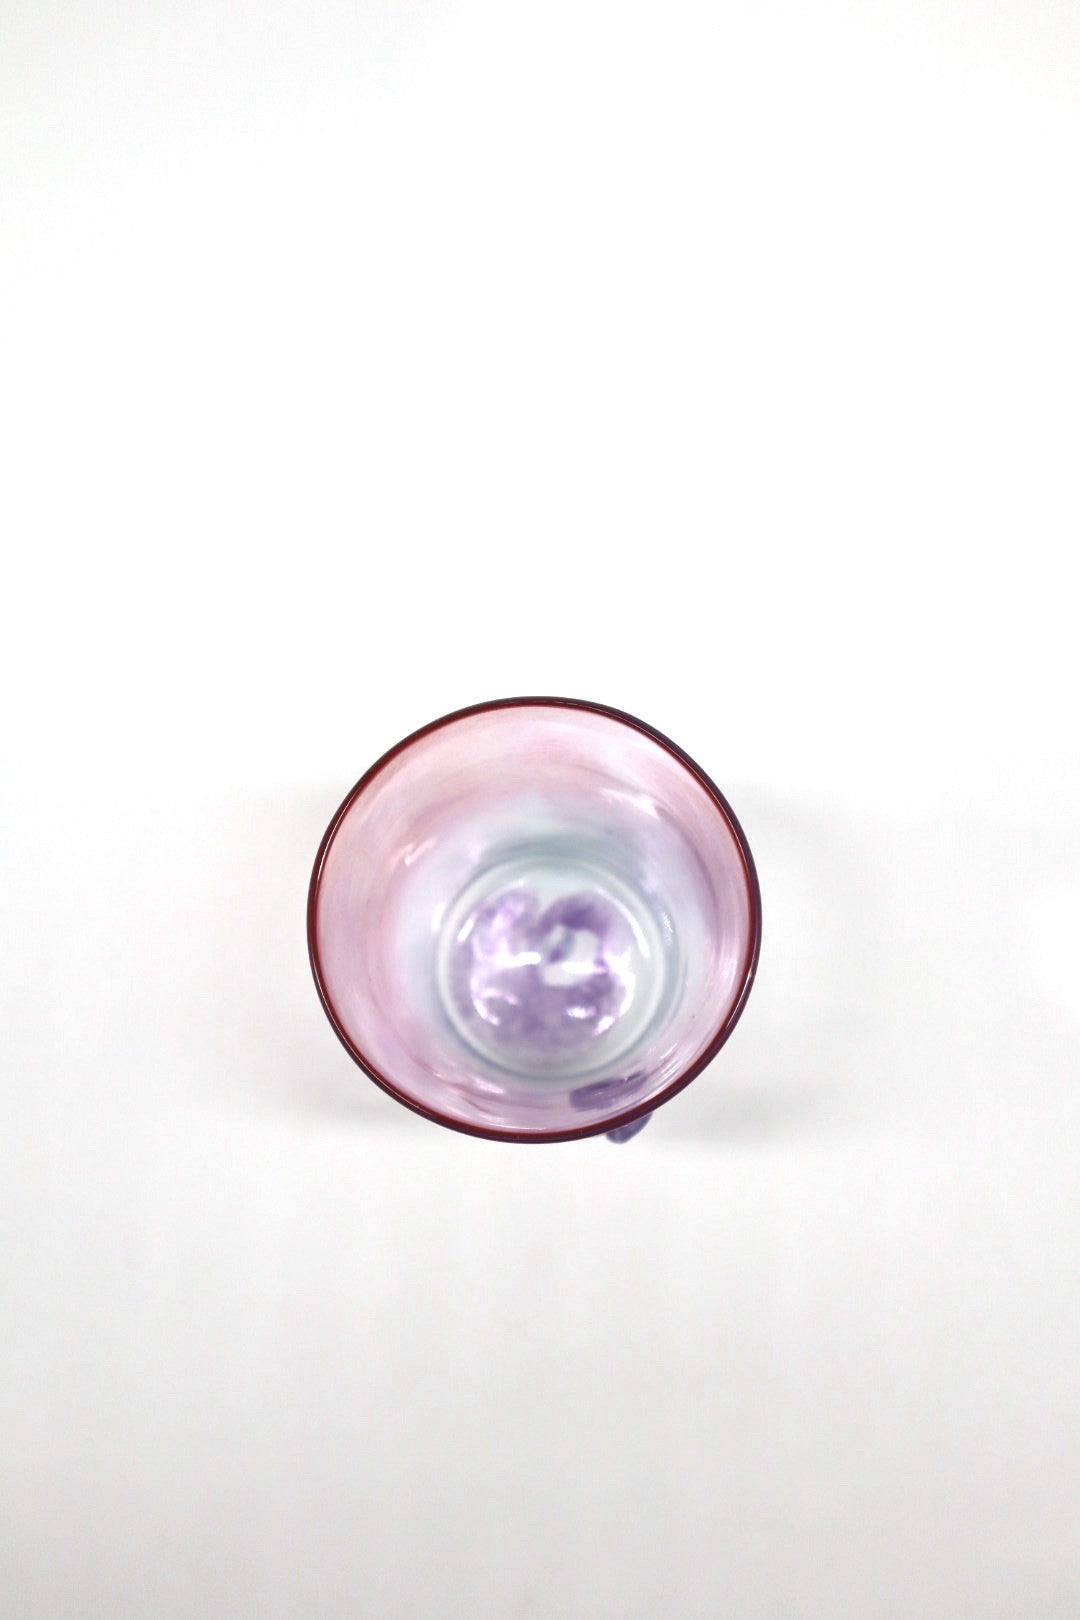 Gum Cup by Miwa Ito